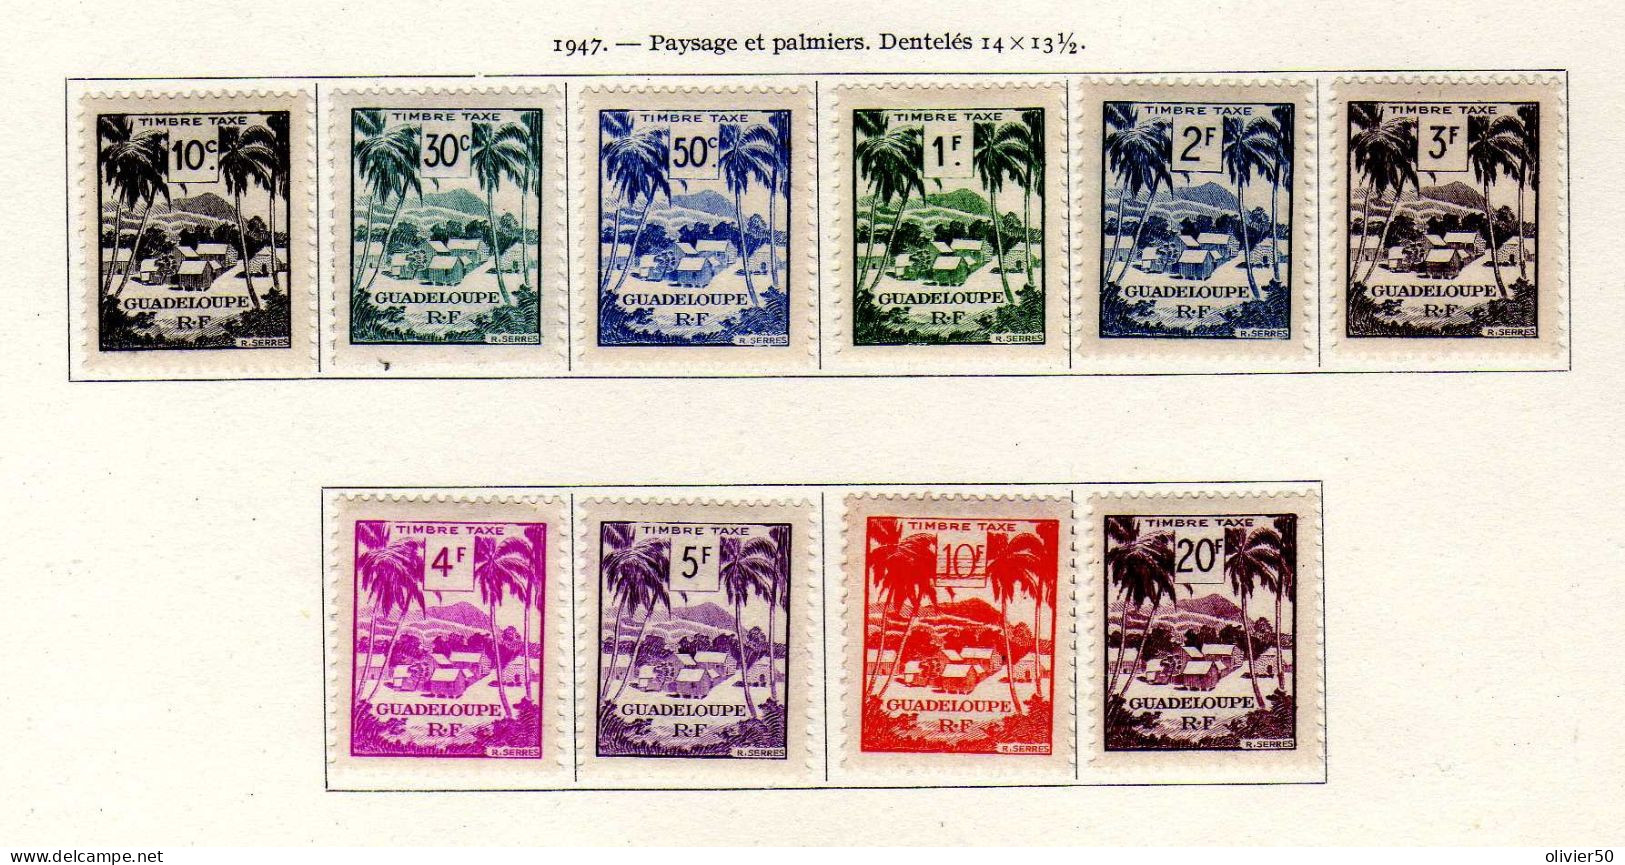 Guadeloupe - 1947 - Timbres-Taxe Palmiers - Neufs* - MH - Strafport